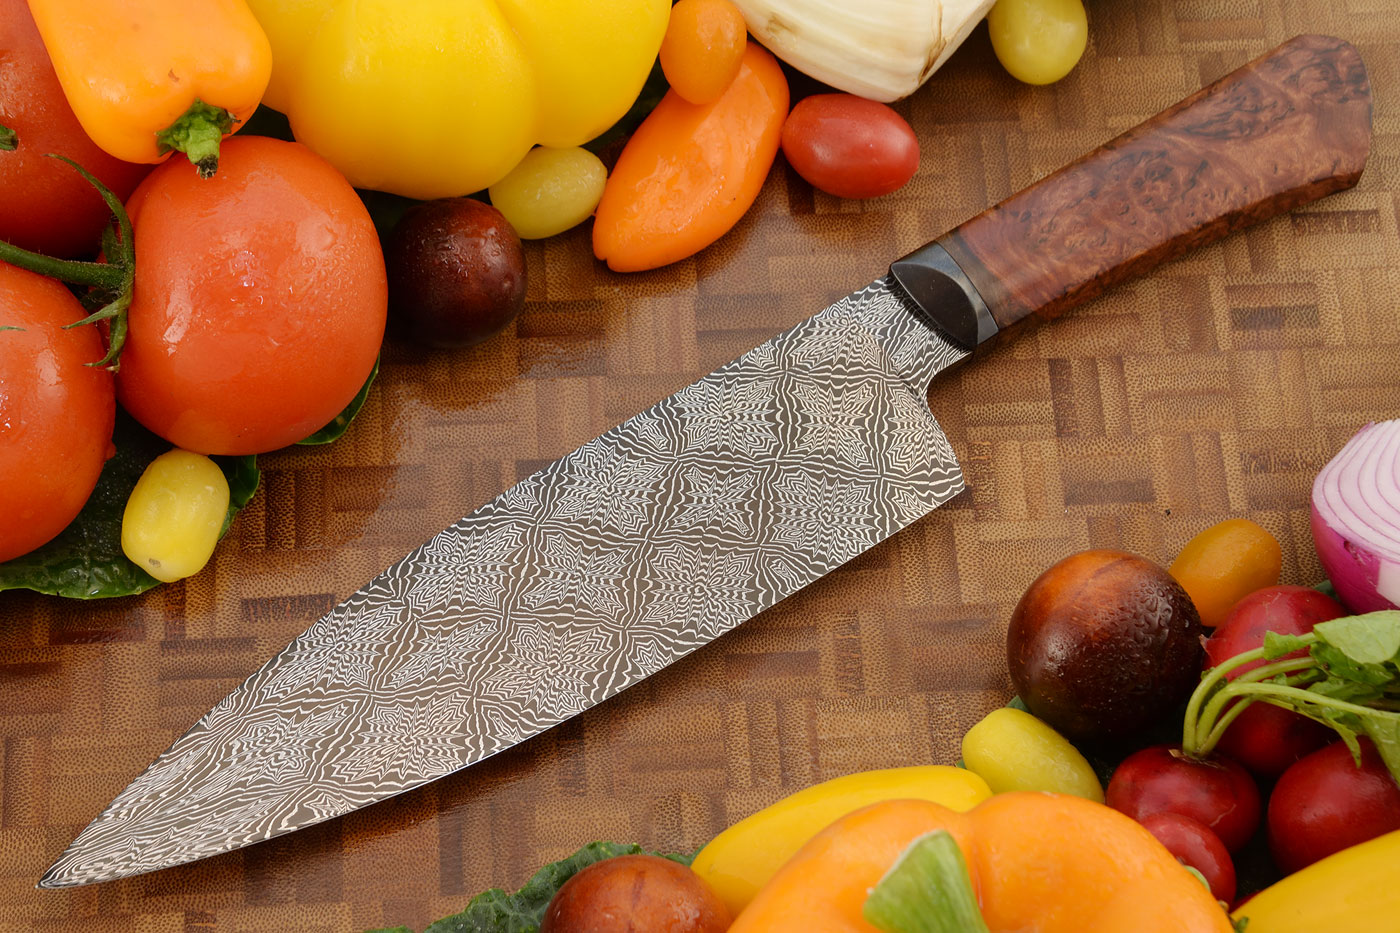 Mosaic Damascus Chef's Knife (8 in.) with Amboyna Burl